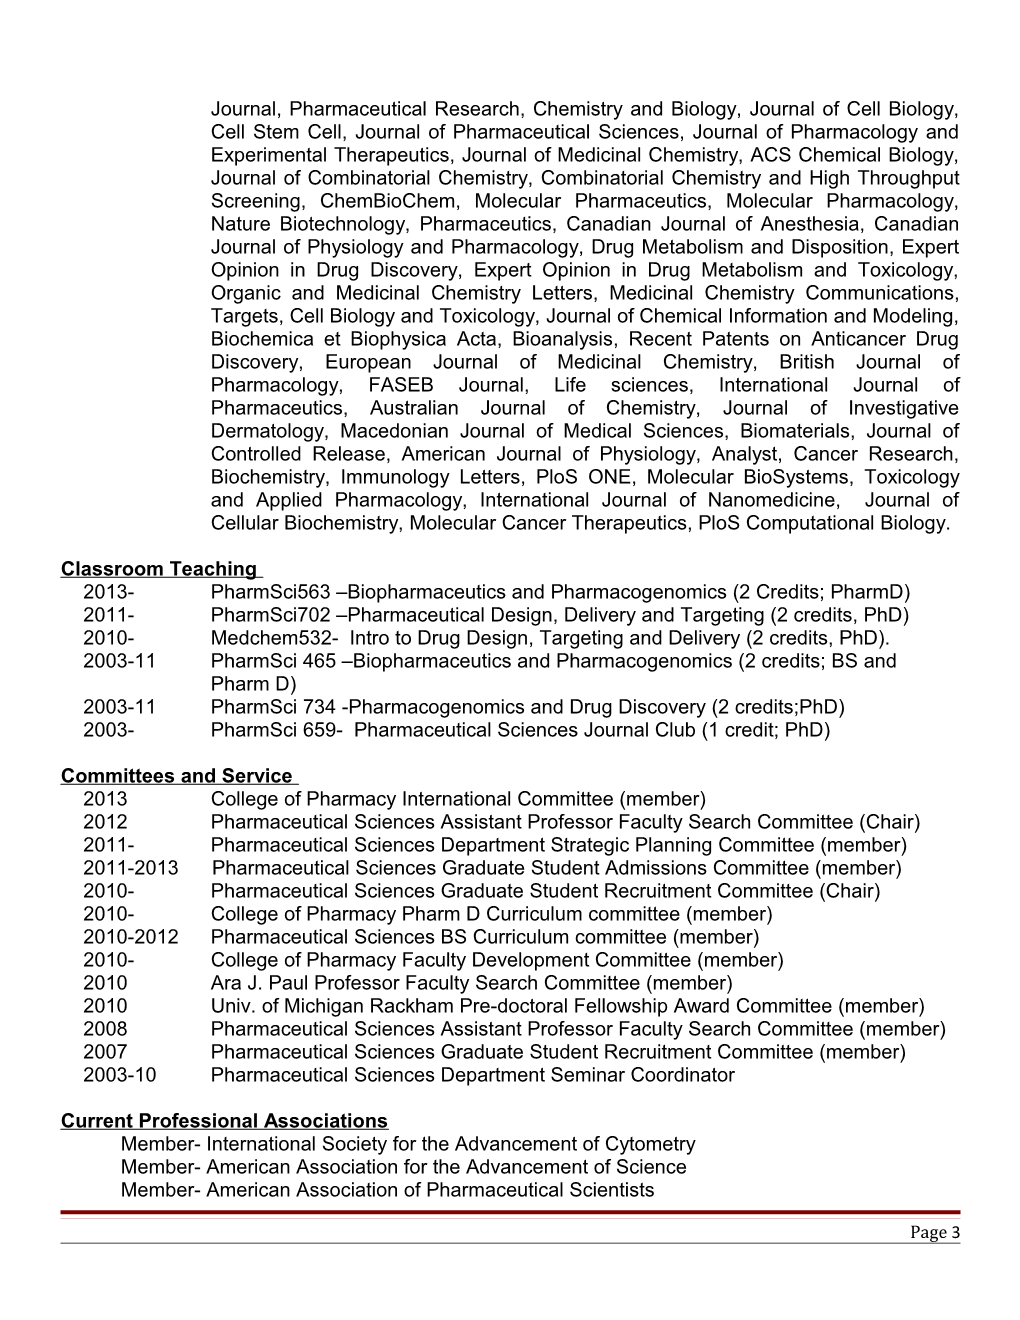 PHS 398/2590 (Rev. 06/09), Biographical Sketch Format Page s3